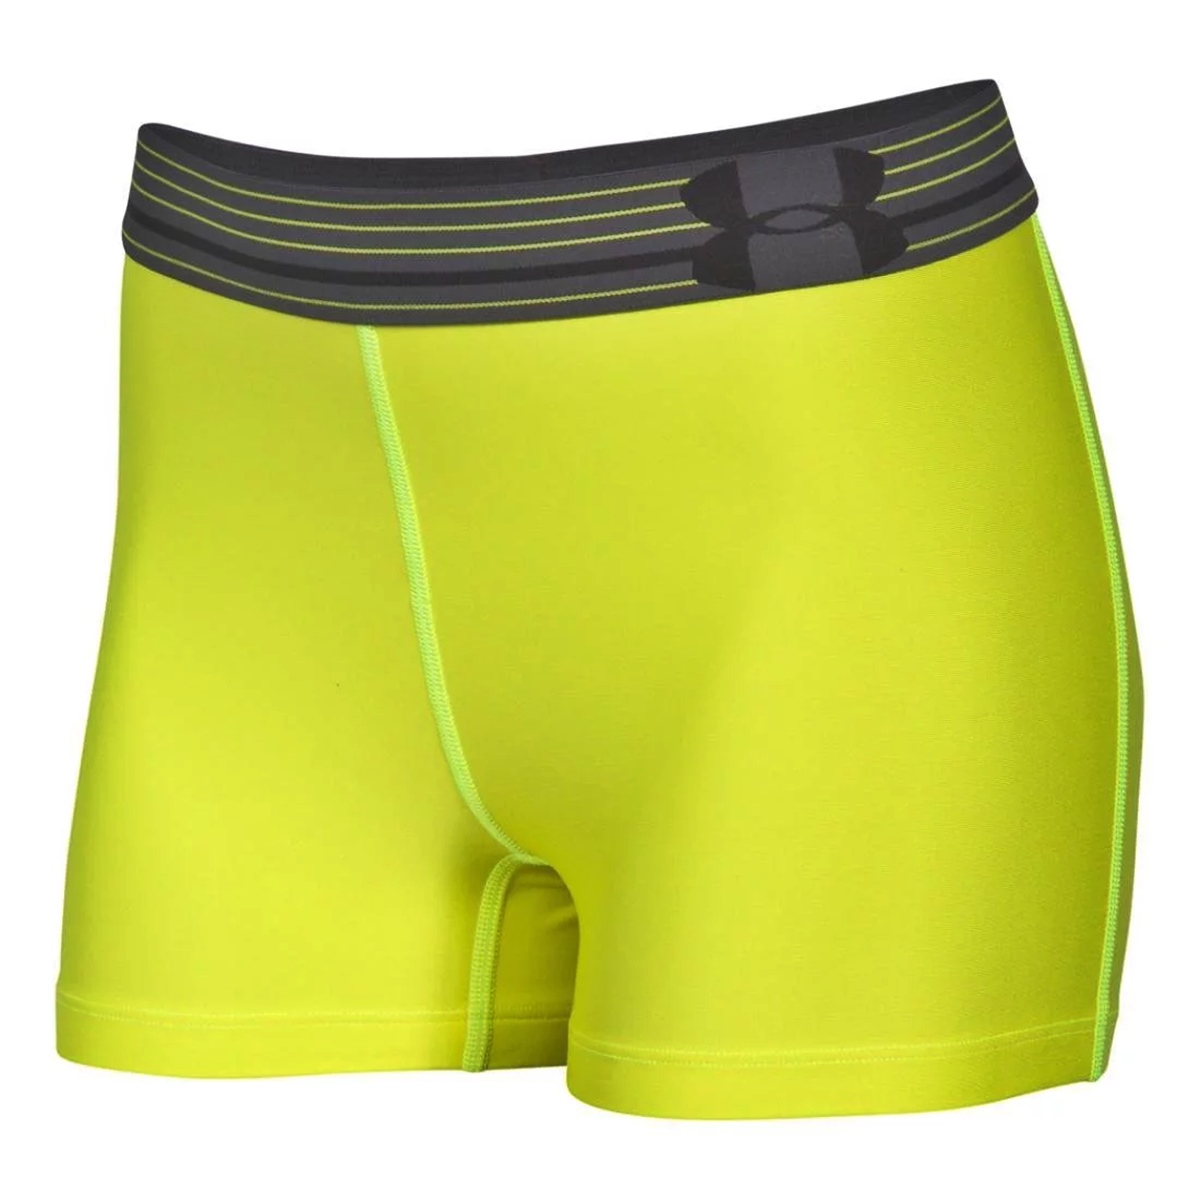 15 Amazing Under Armour Women’s Compression Shorts For 2023